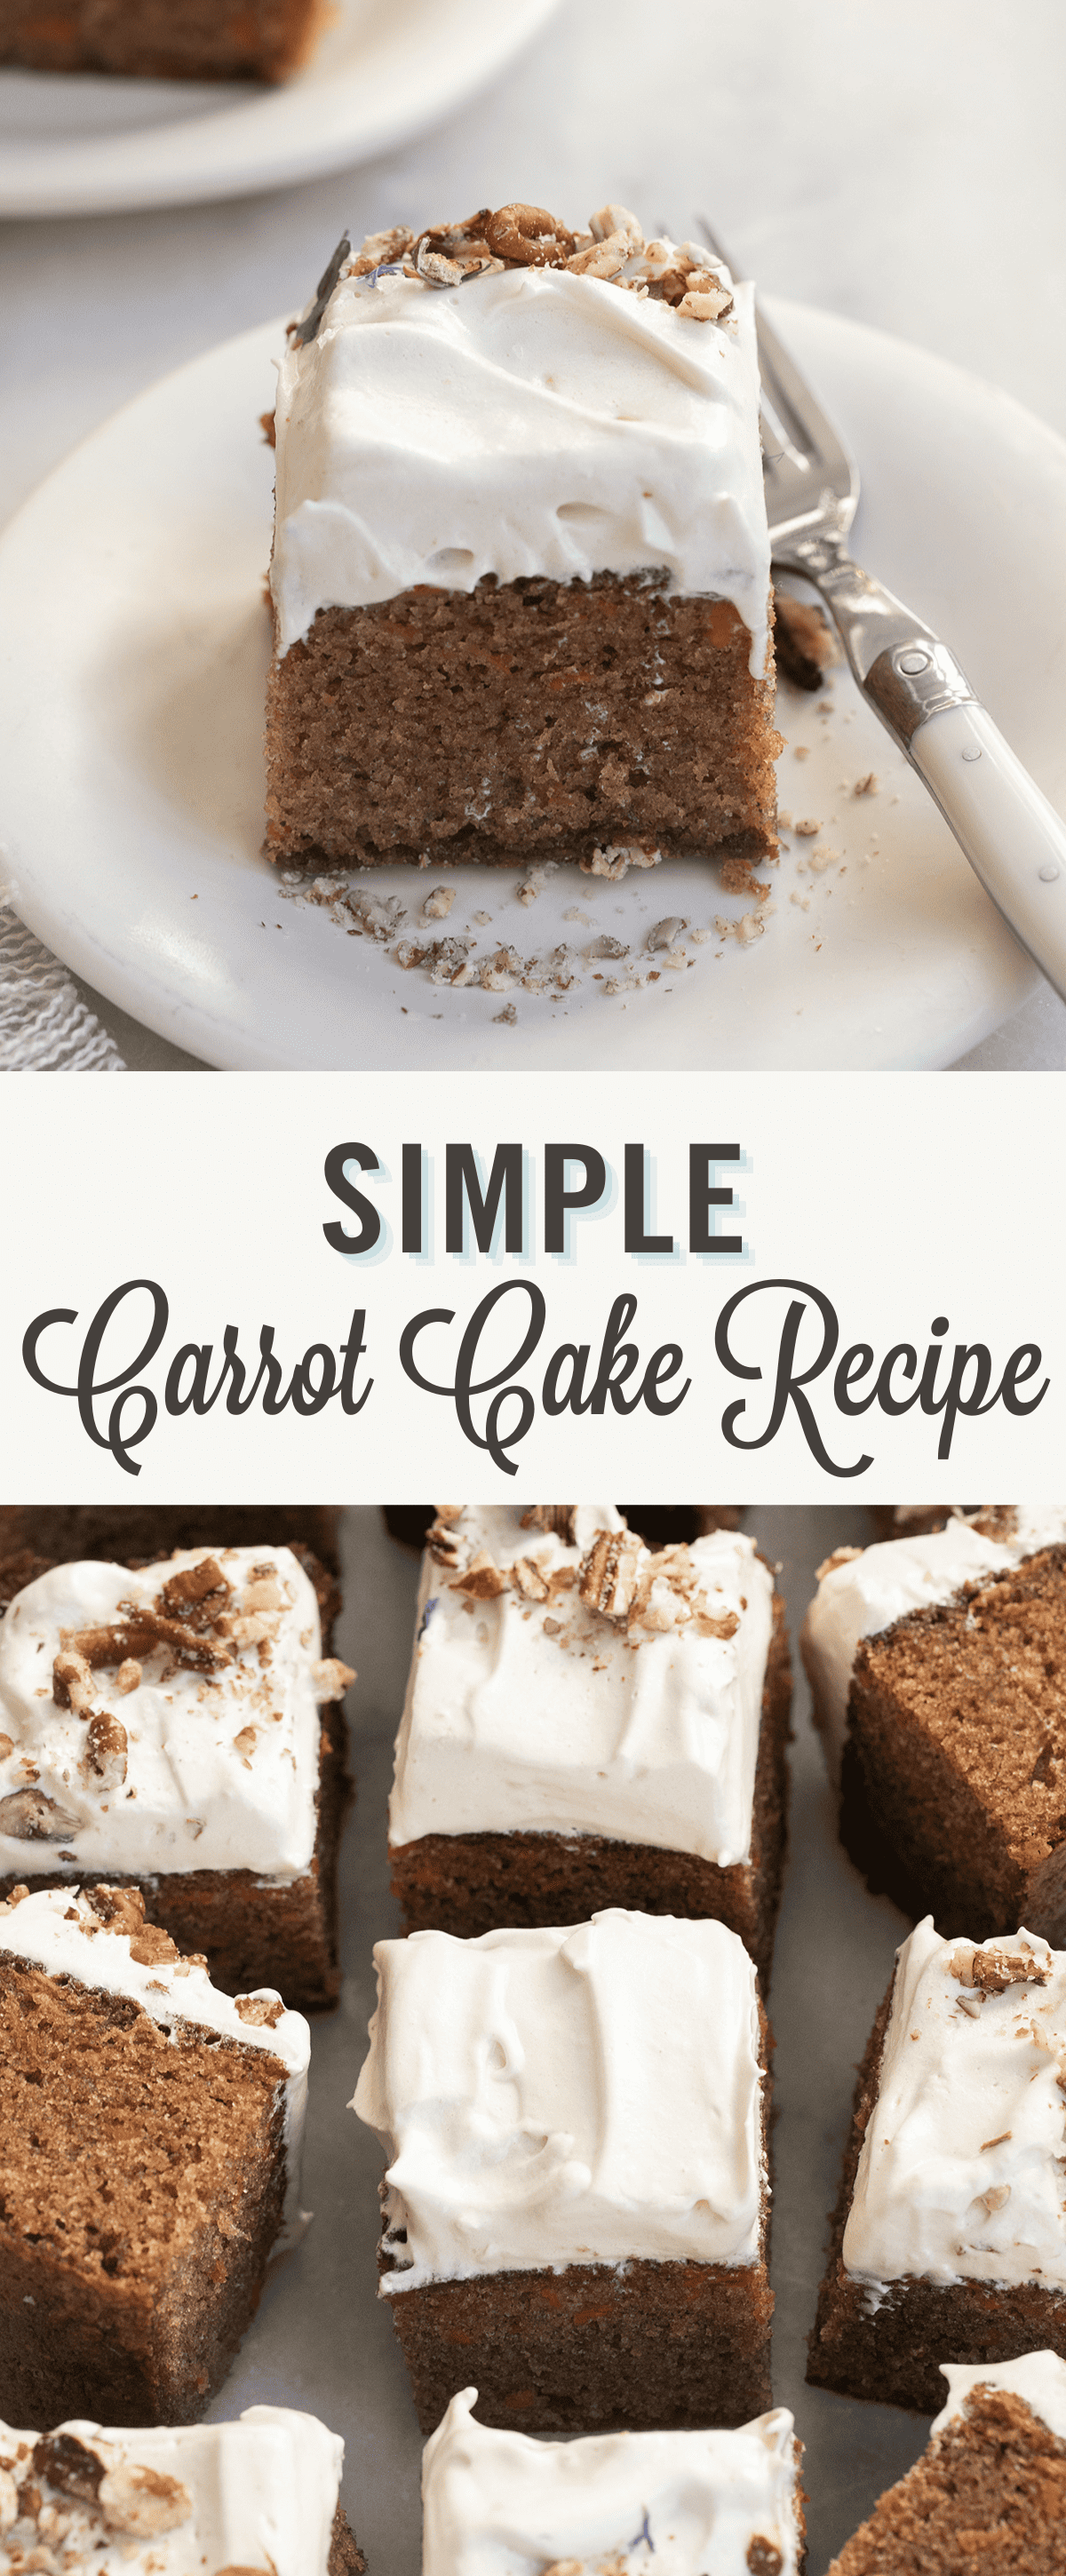 Carrot cake that is simple to make.